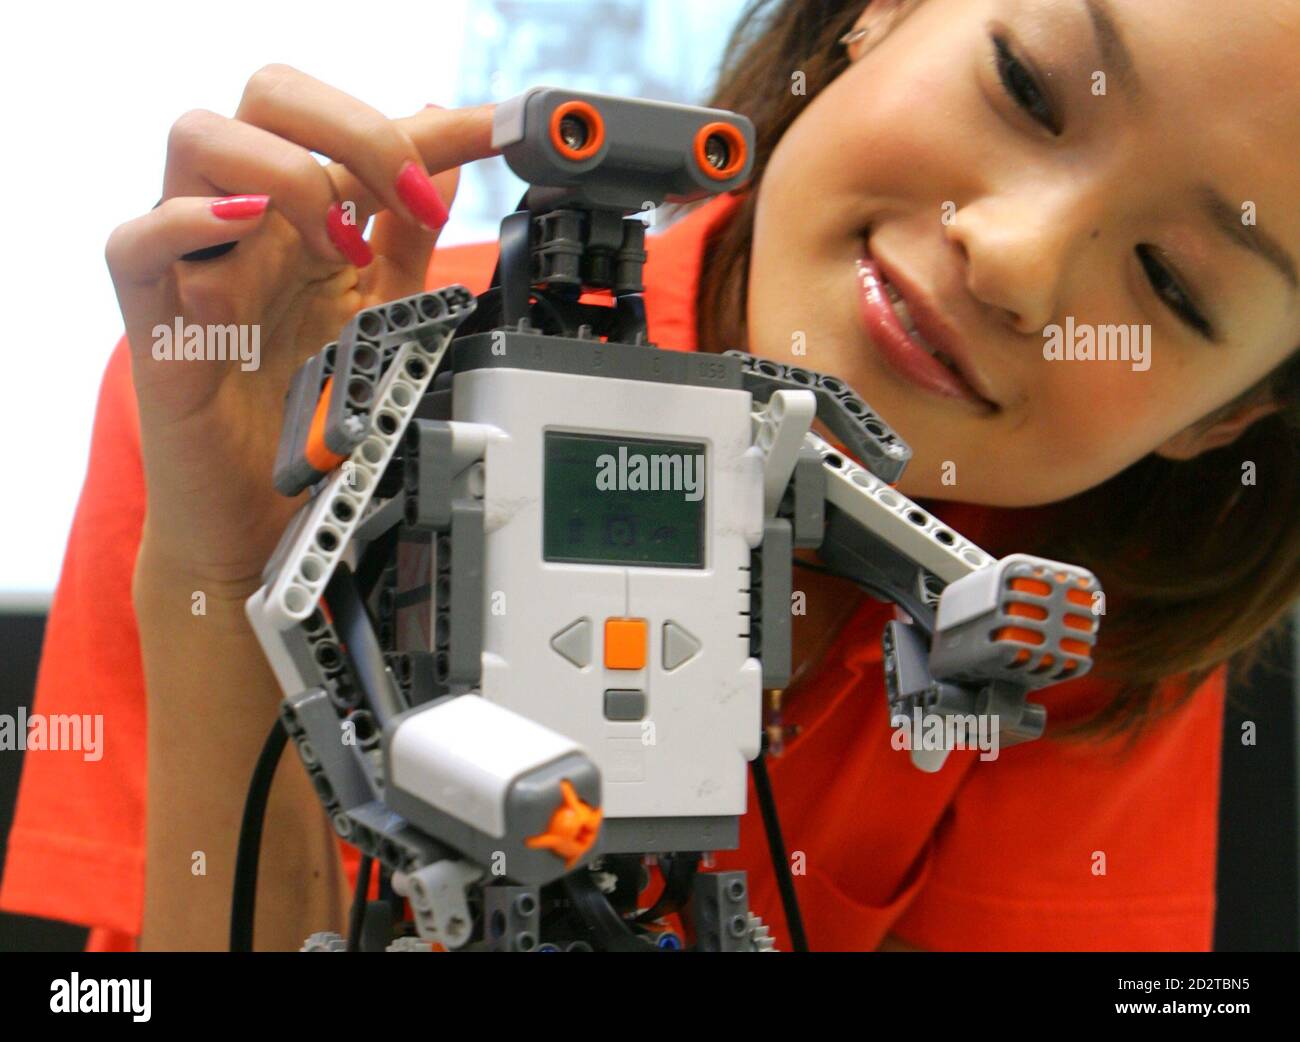 Japanese model Akiko Fukuda presents Lego Group's new educational robot " LEGO MINDSTORMS NXT", equipped with a 32-bit microprocessor, USB 2.0, and  Bluetooth during a press preview in Tokyo in this June 6,